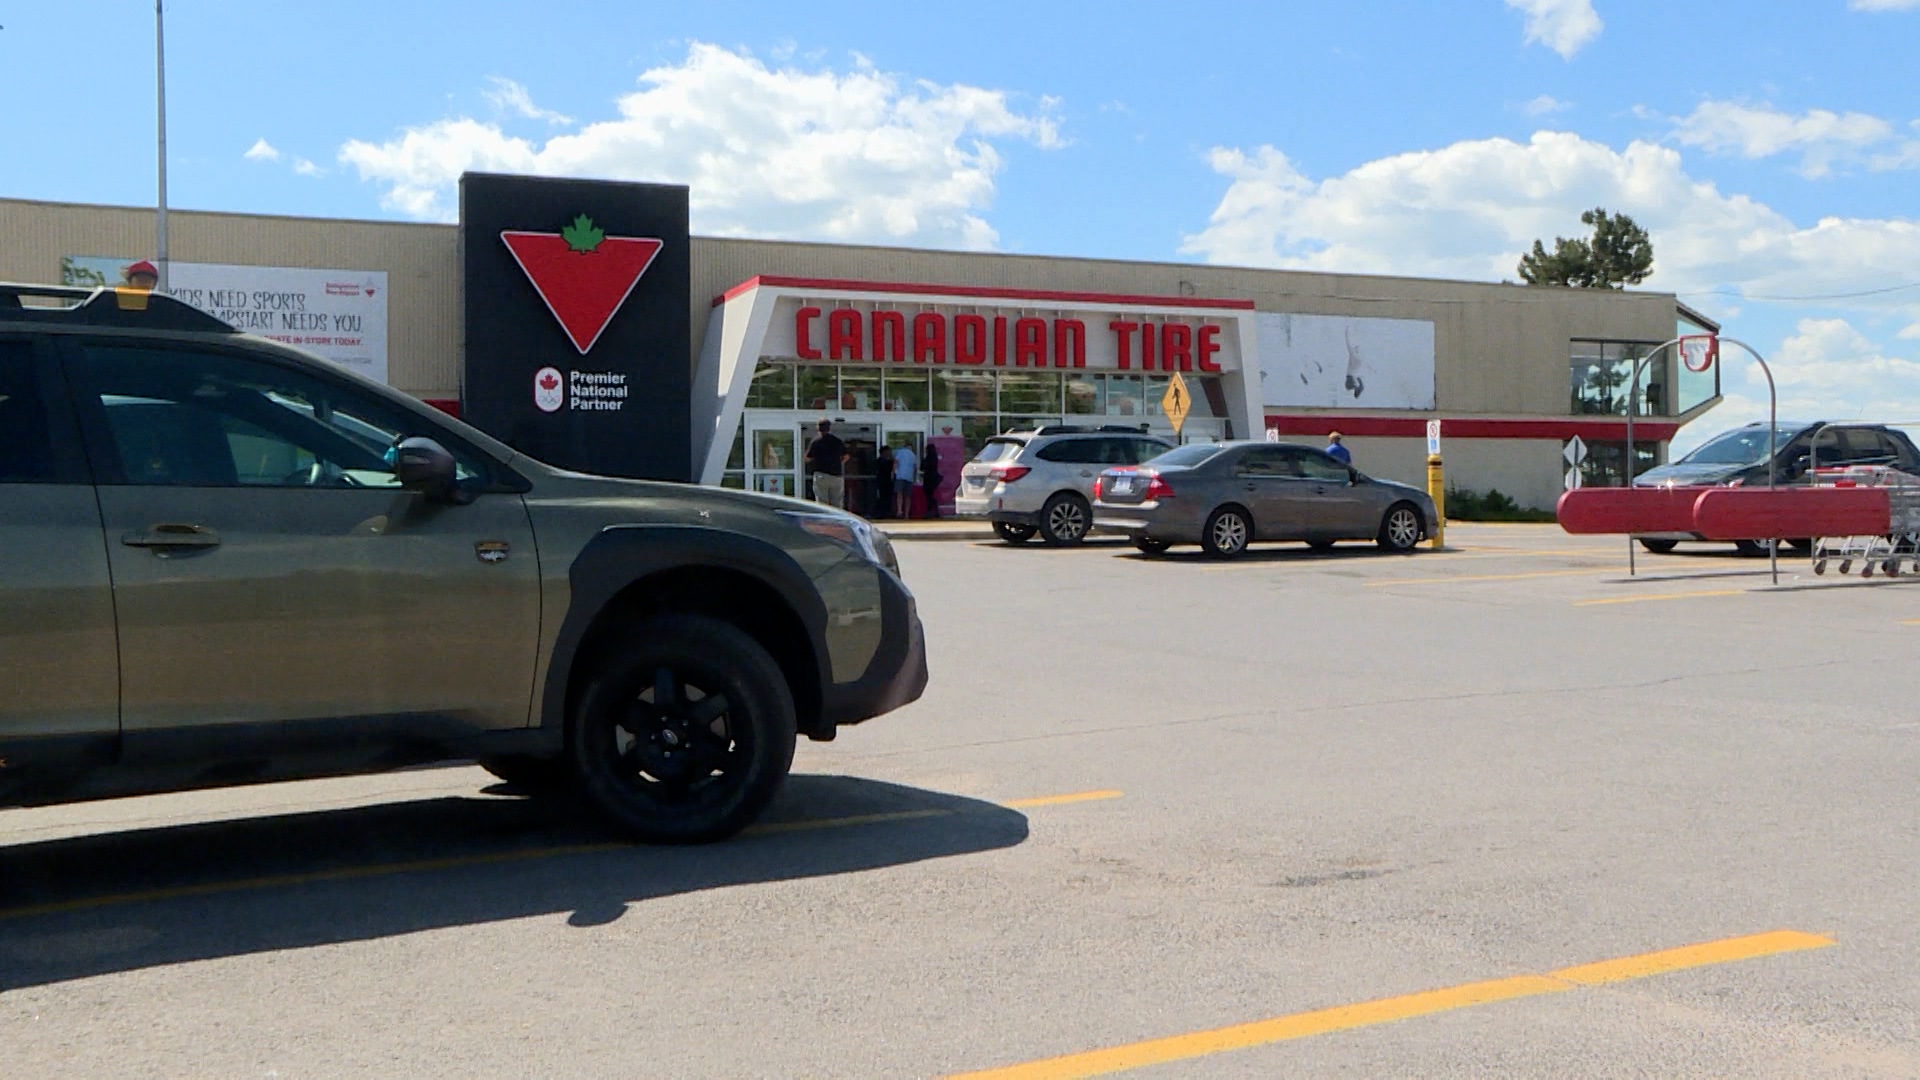 Kingston Centre's Canadian Tire store makes plans to relocate - Kingston